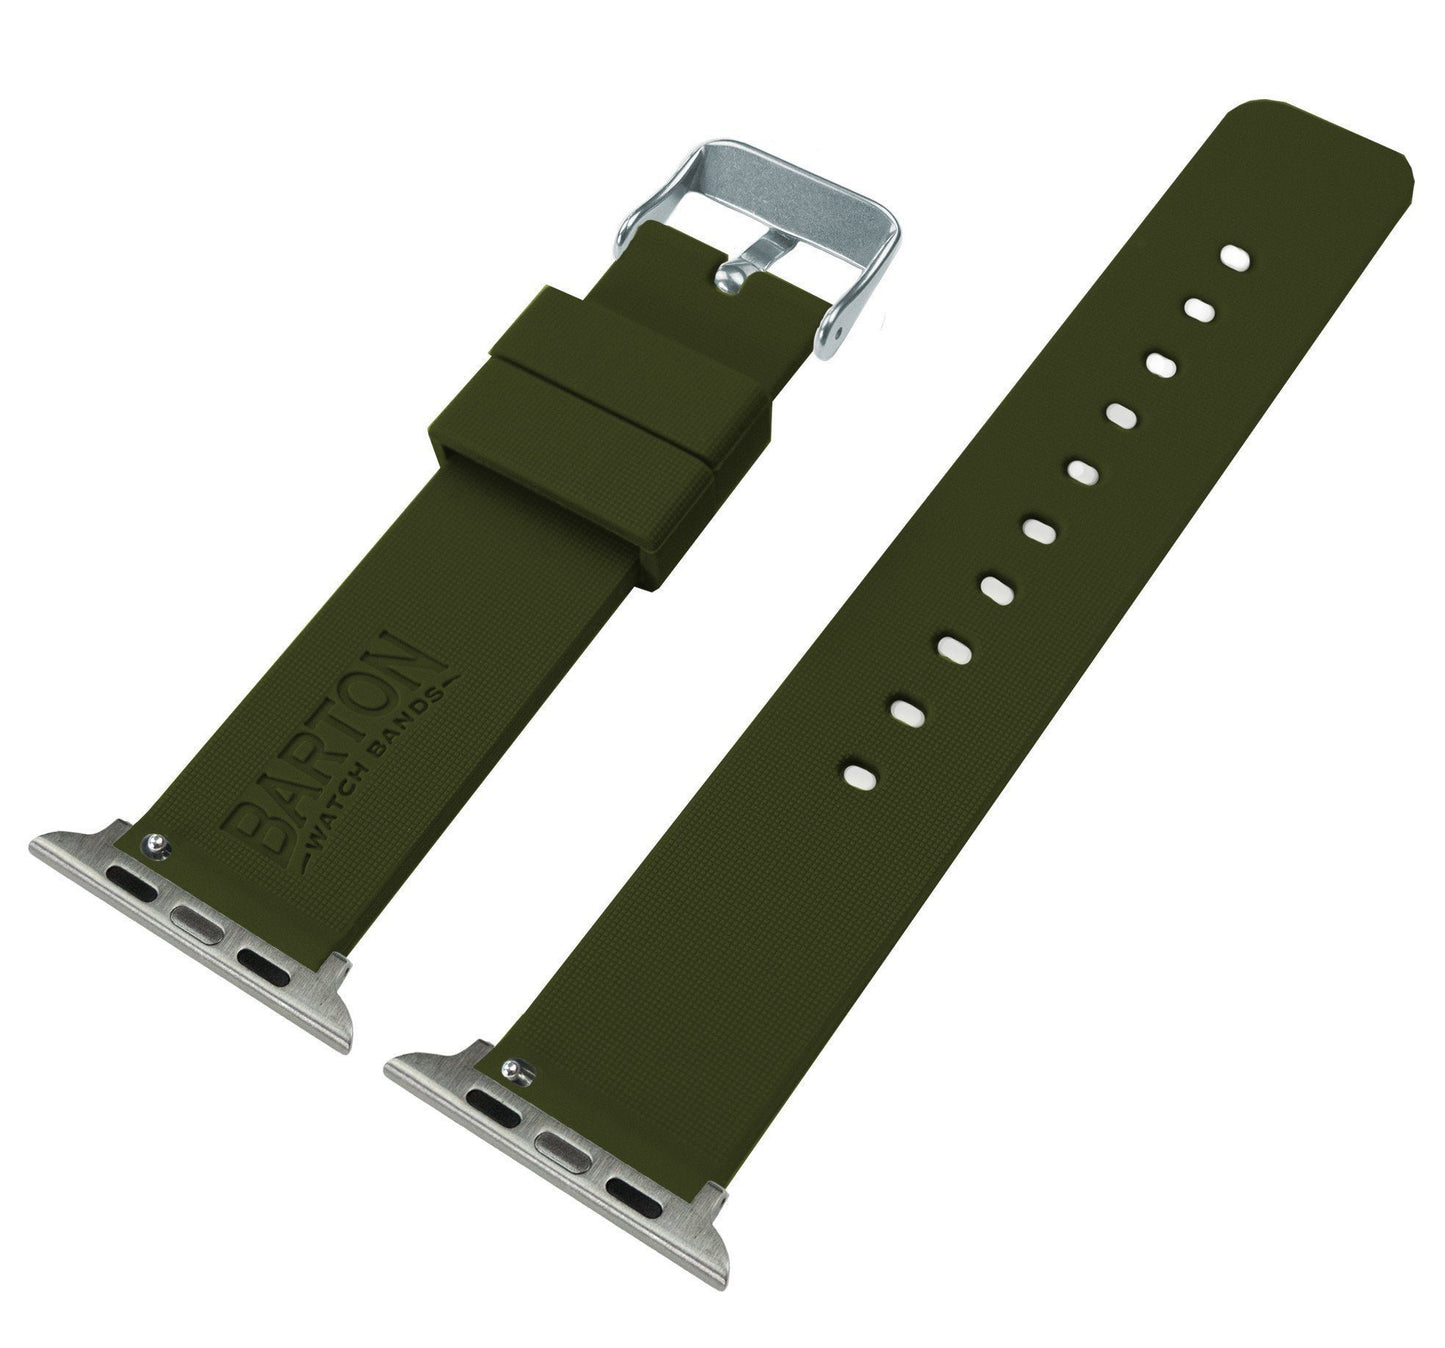 Apple Watch | Silicone | Army Green - Barton Watch Bands